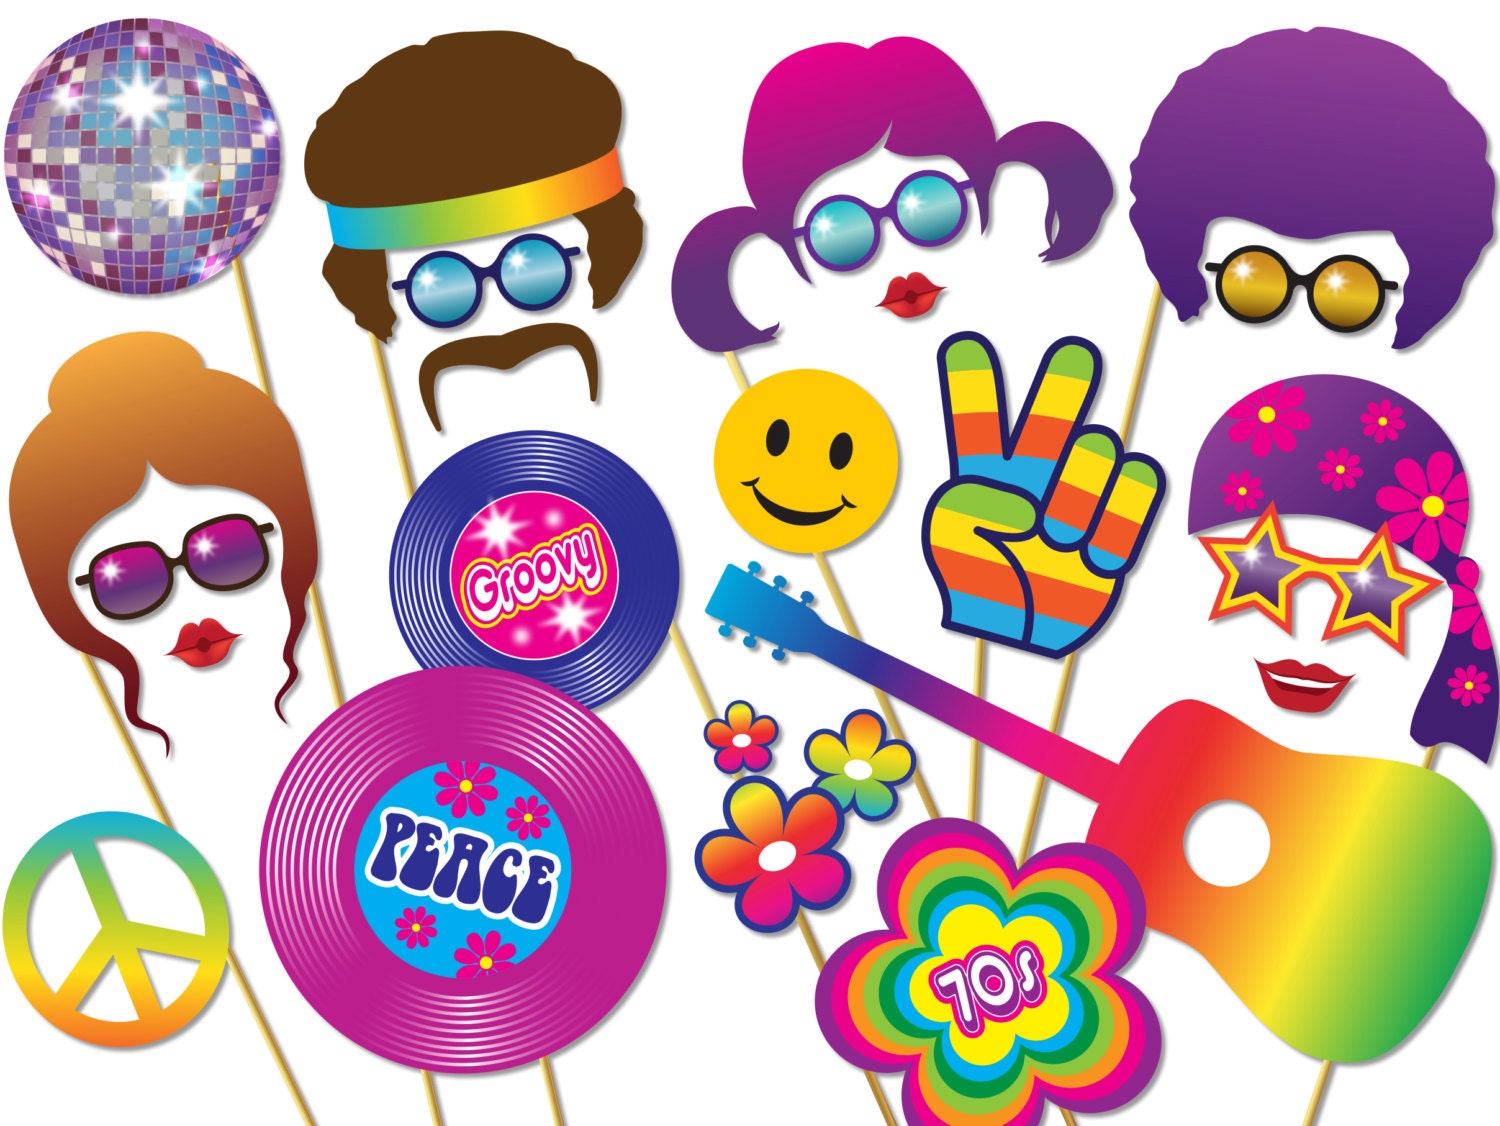 70s-party-photo-booth-props-set-instant-download-photobooth